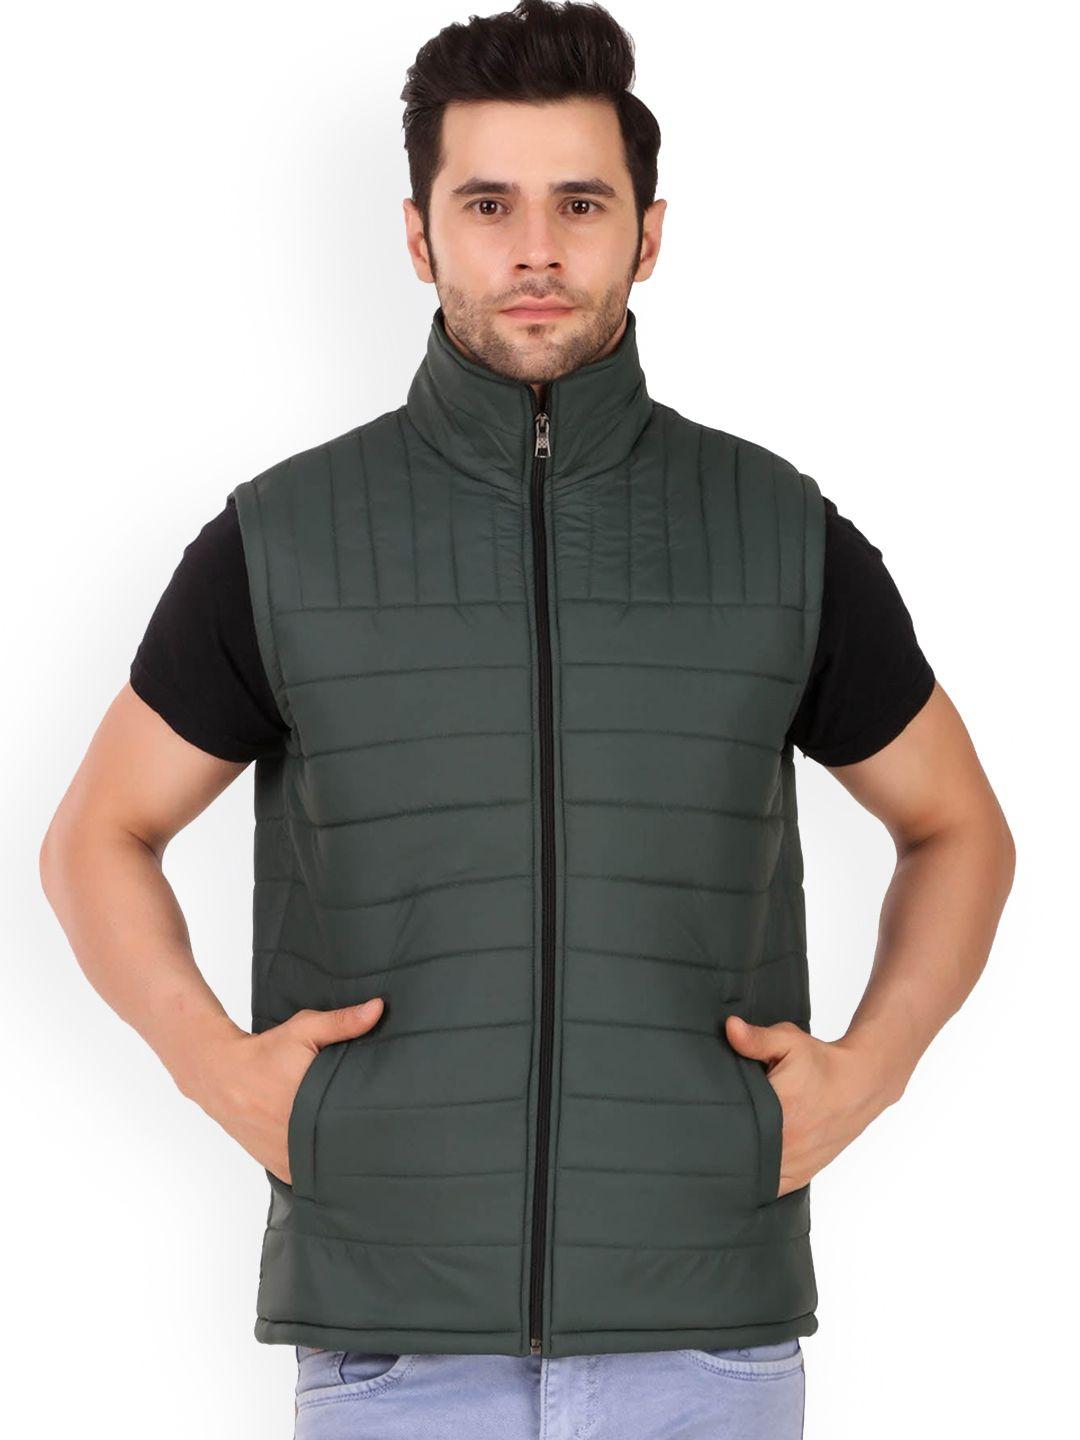 leather-retail-men-green-cut-sleeve-winter-polyester-outdoor-jacket-padded-jacket